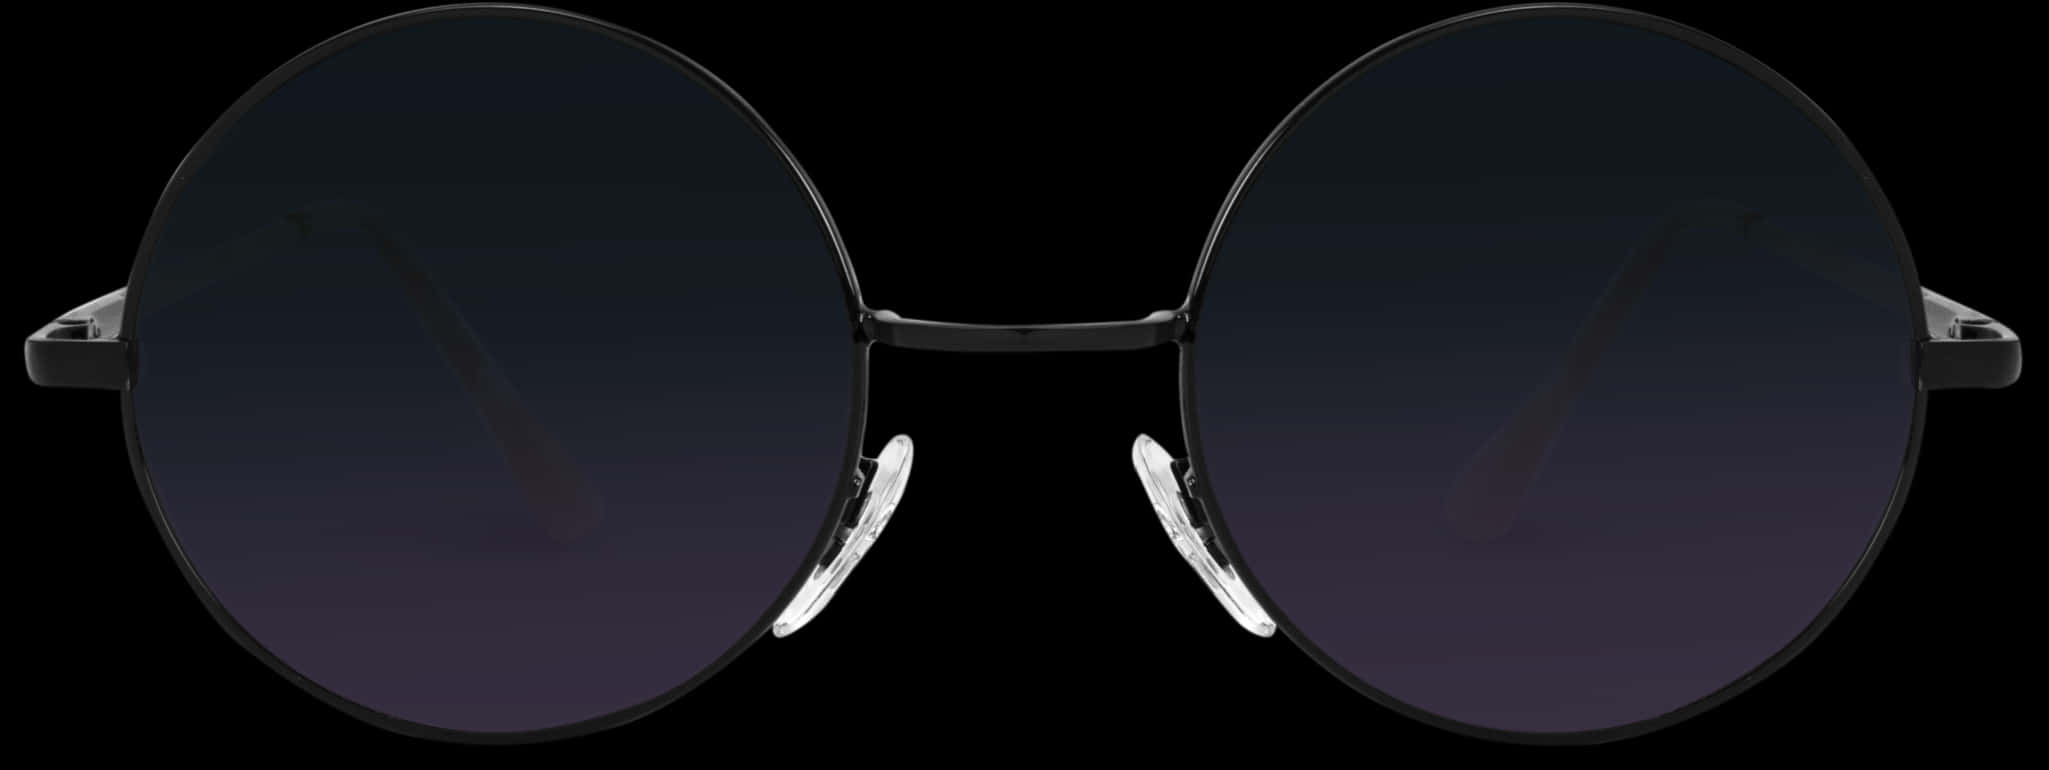 Round Black Sunglasses Isolated PNG image